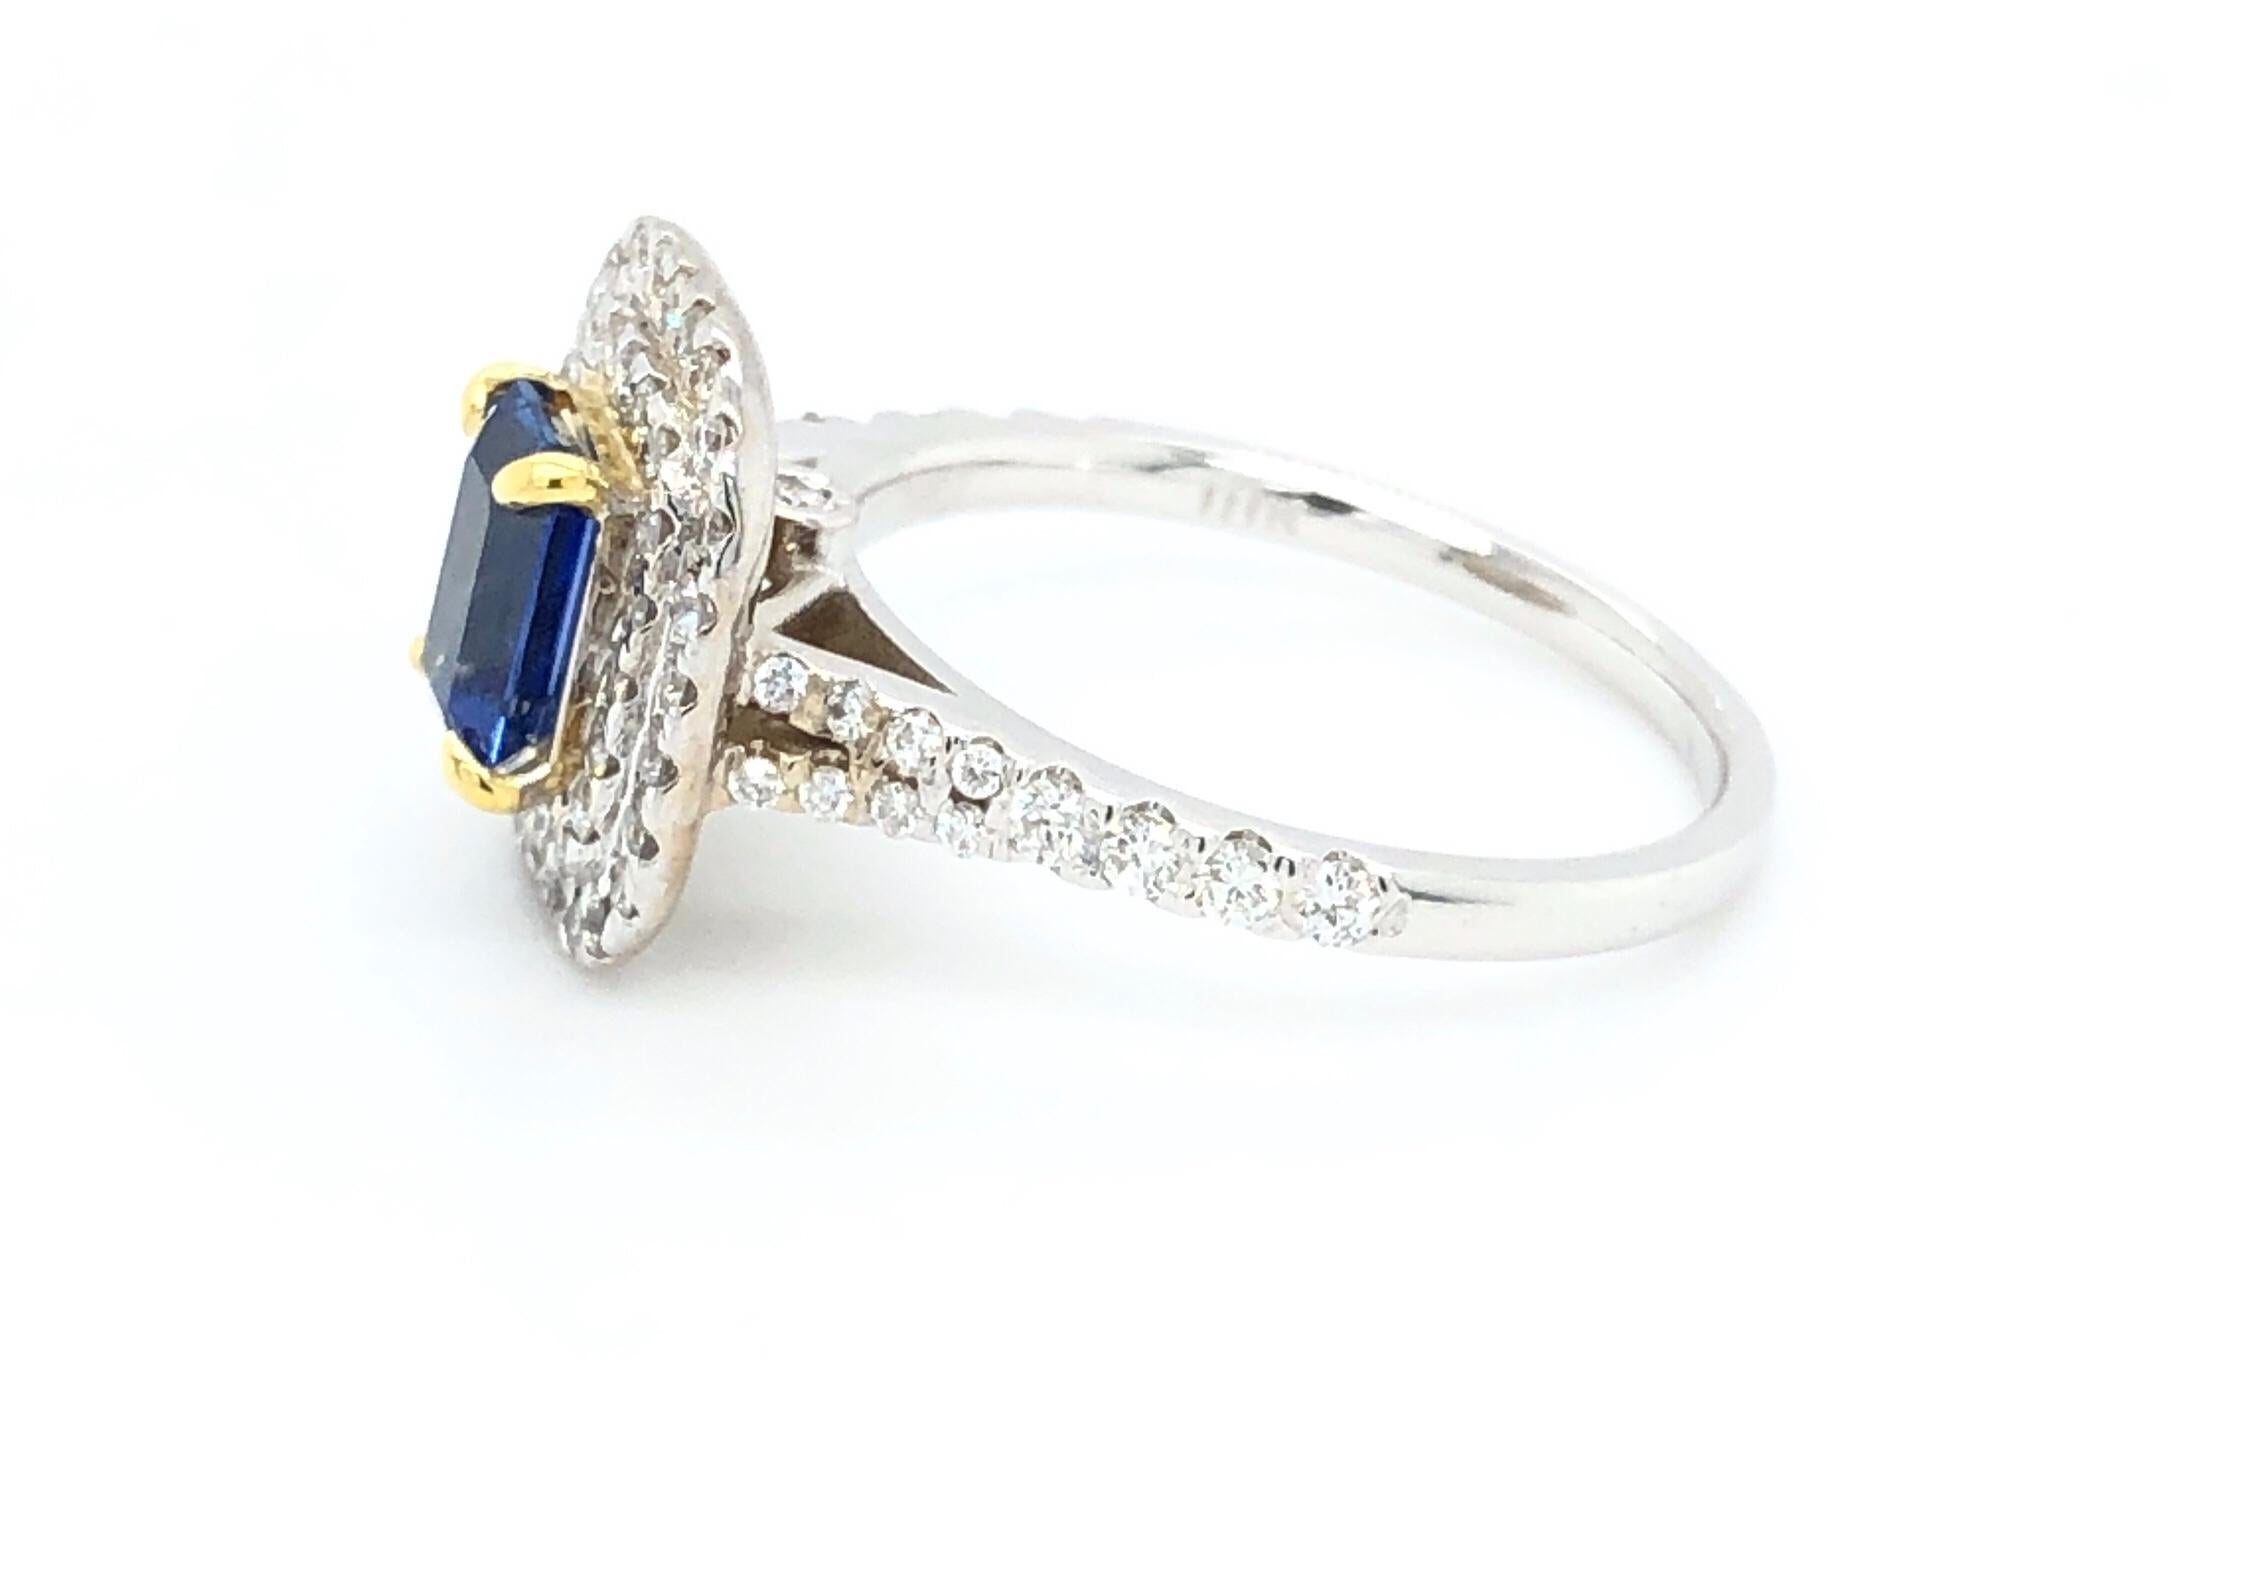 Offered here is a classic sapphire & diamonds ring set in two ( 2 ) tone 18kt gold. The ring is simple and elegant at the same time. The ring measures about 0.50 x 0.50 mm on top and the shank graduates down from 2.8 mm down to 1.6 mm on the bottom